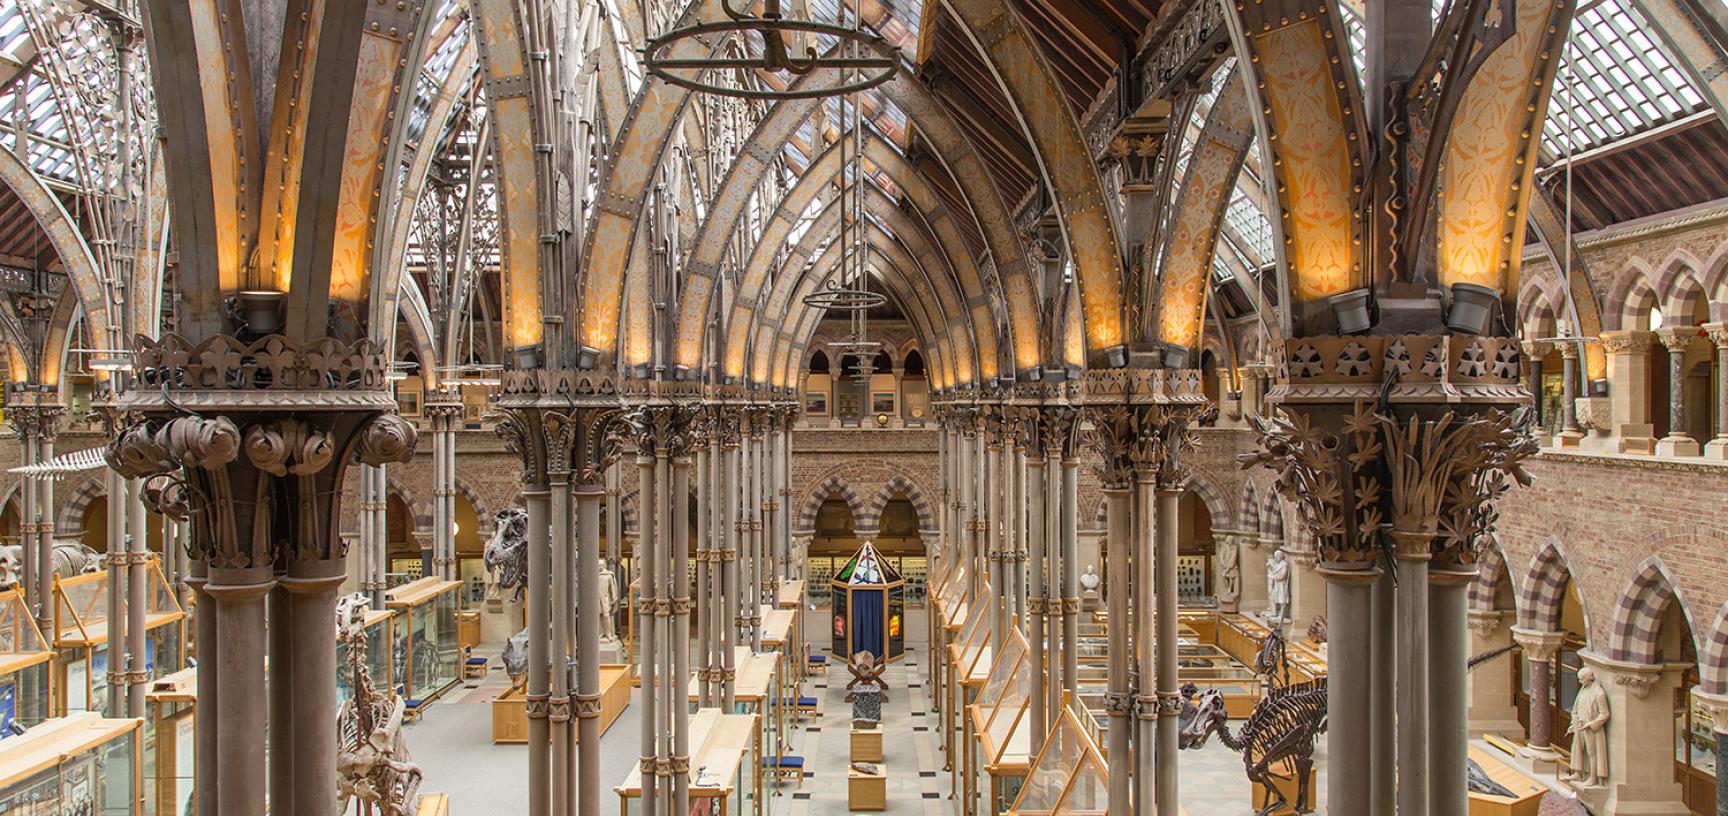 Oxford University Museum of Natural History interior architecture